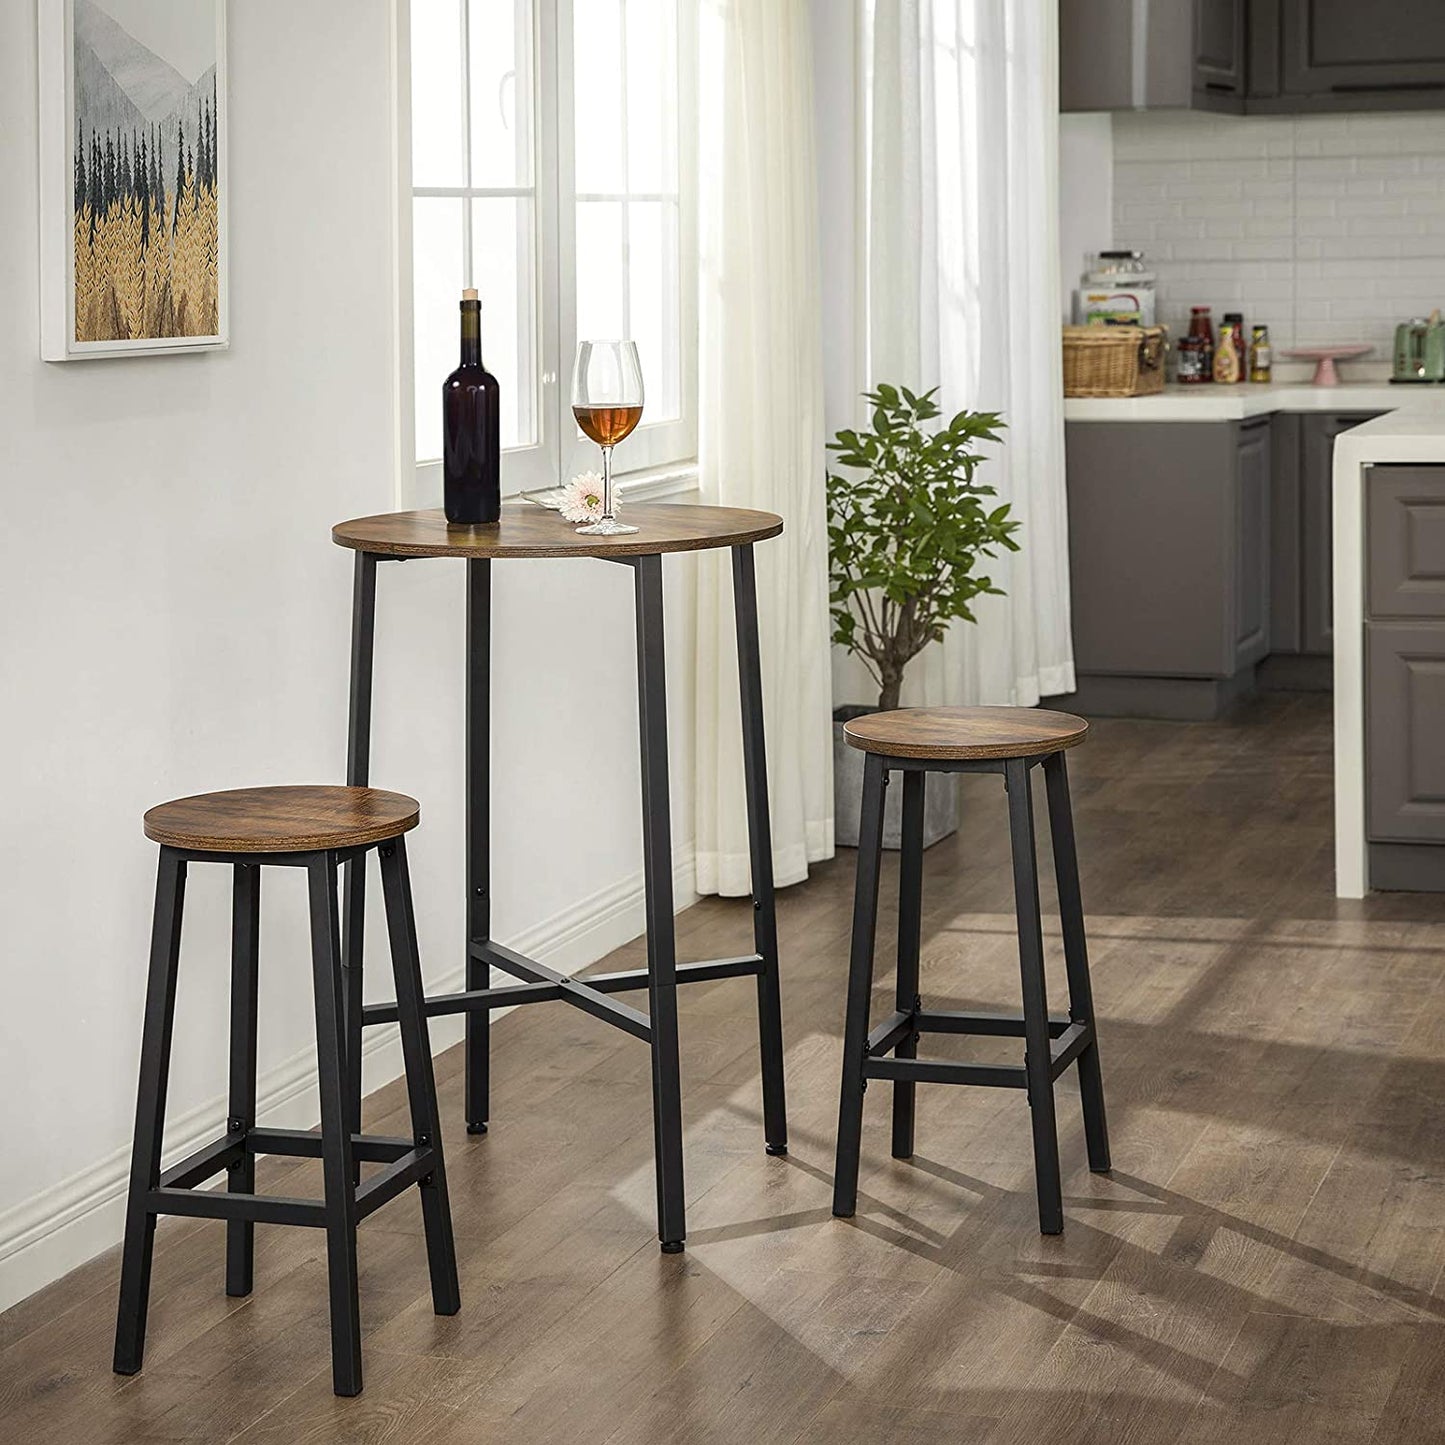 Nancy's Bar Stools 2 Pieces - Bar Chairs with Footrest - Bar Stool Industrial - Industrial - Stable - 32 x 65 cm (Ø x H)